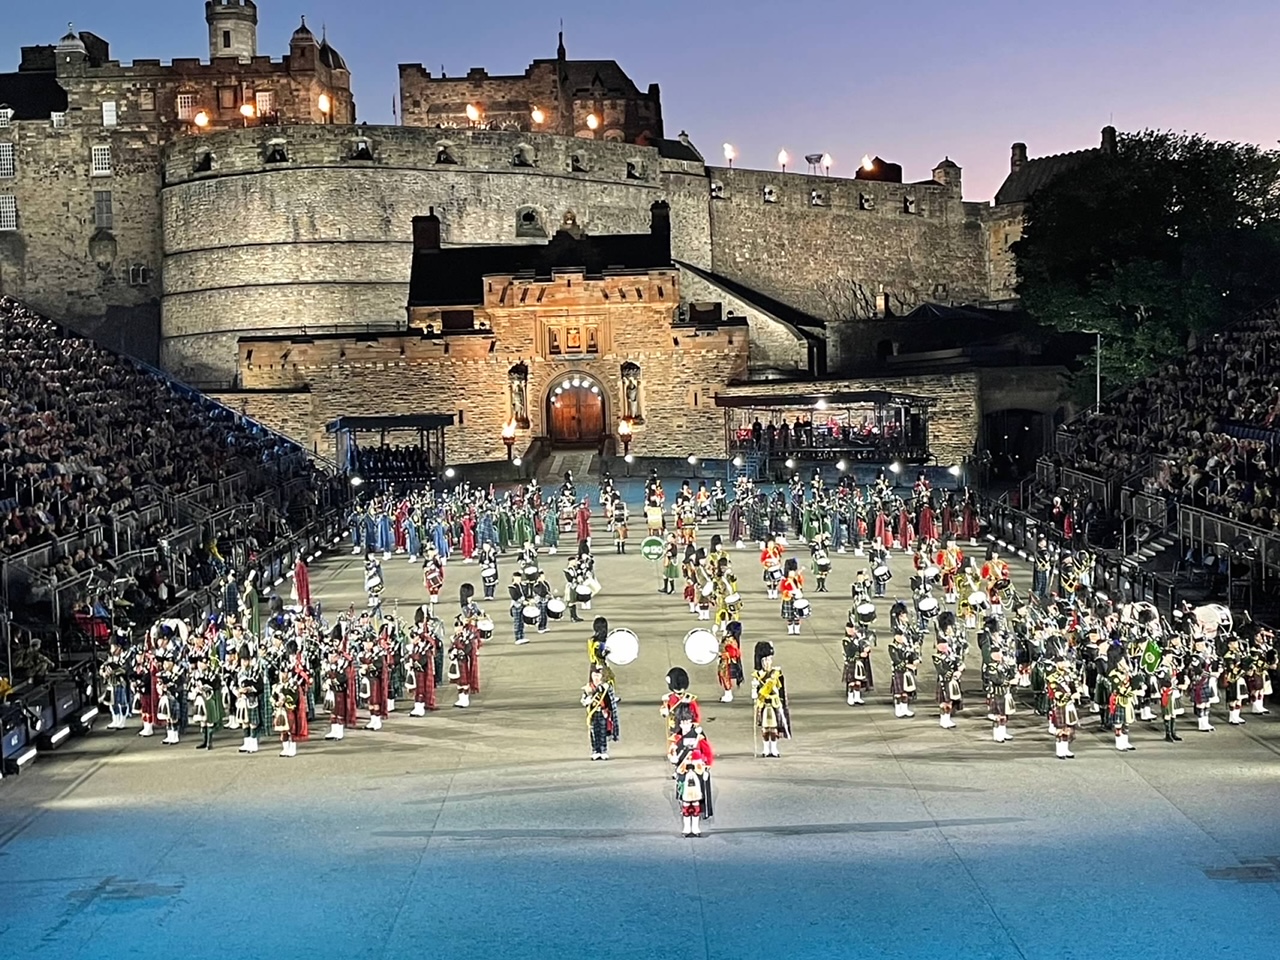 Edinburgh's Royal Military Tattoo is an event worthy of your bucket list. It's a unique performance from military bands across the globe and of course bagpipers!